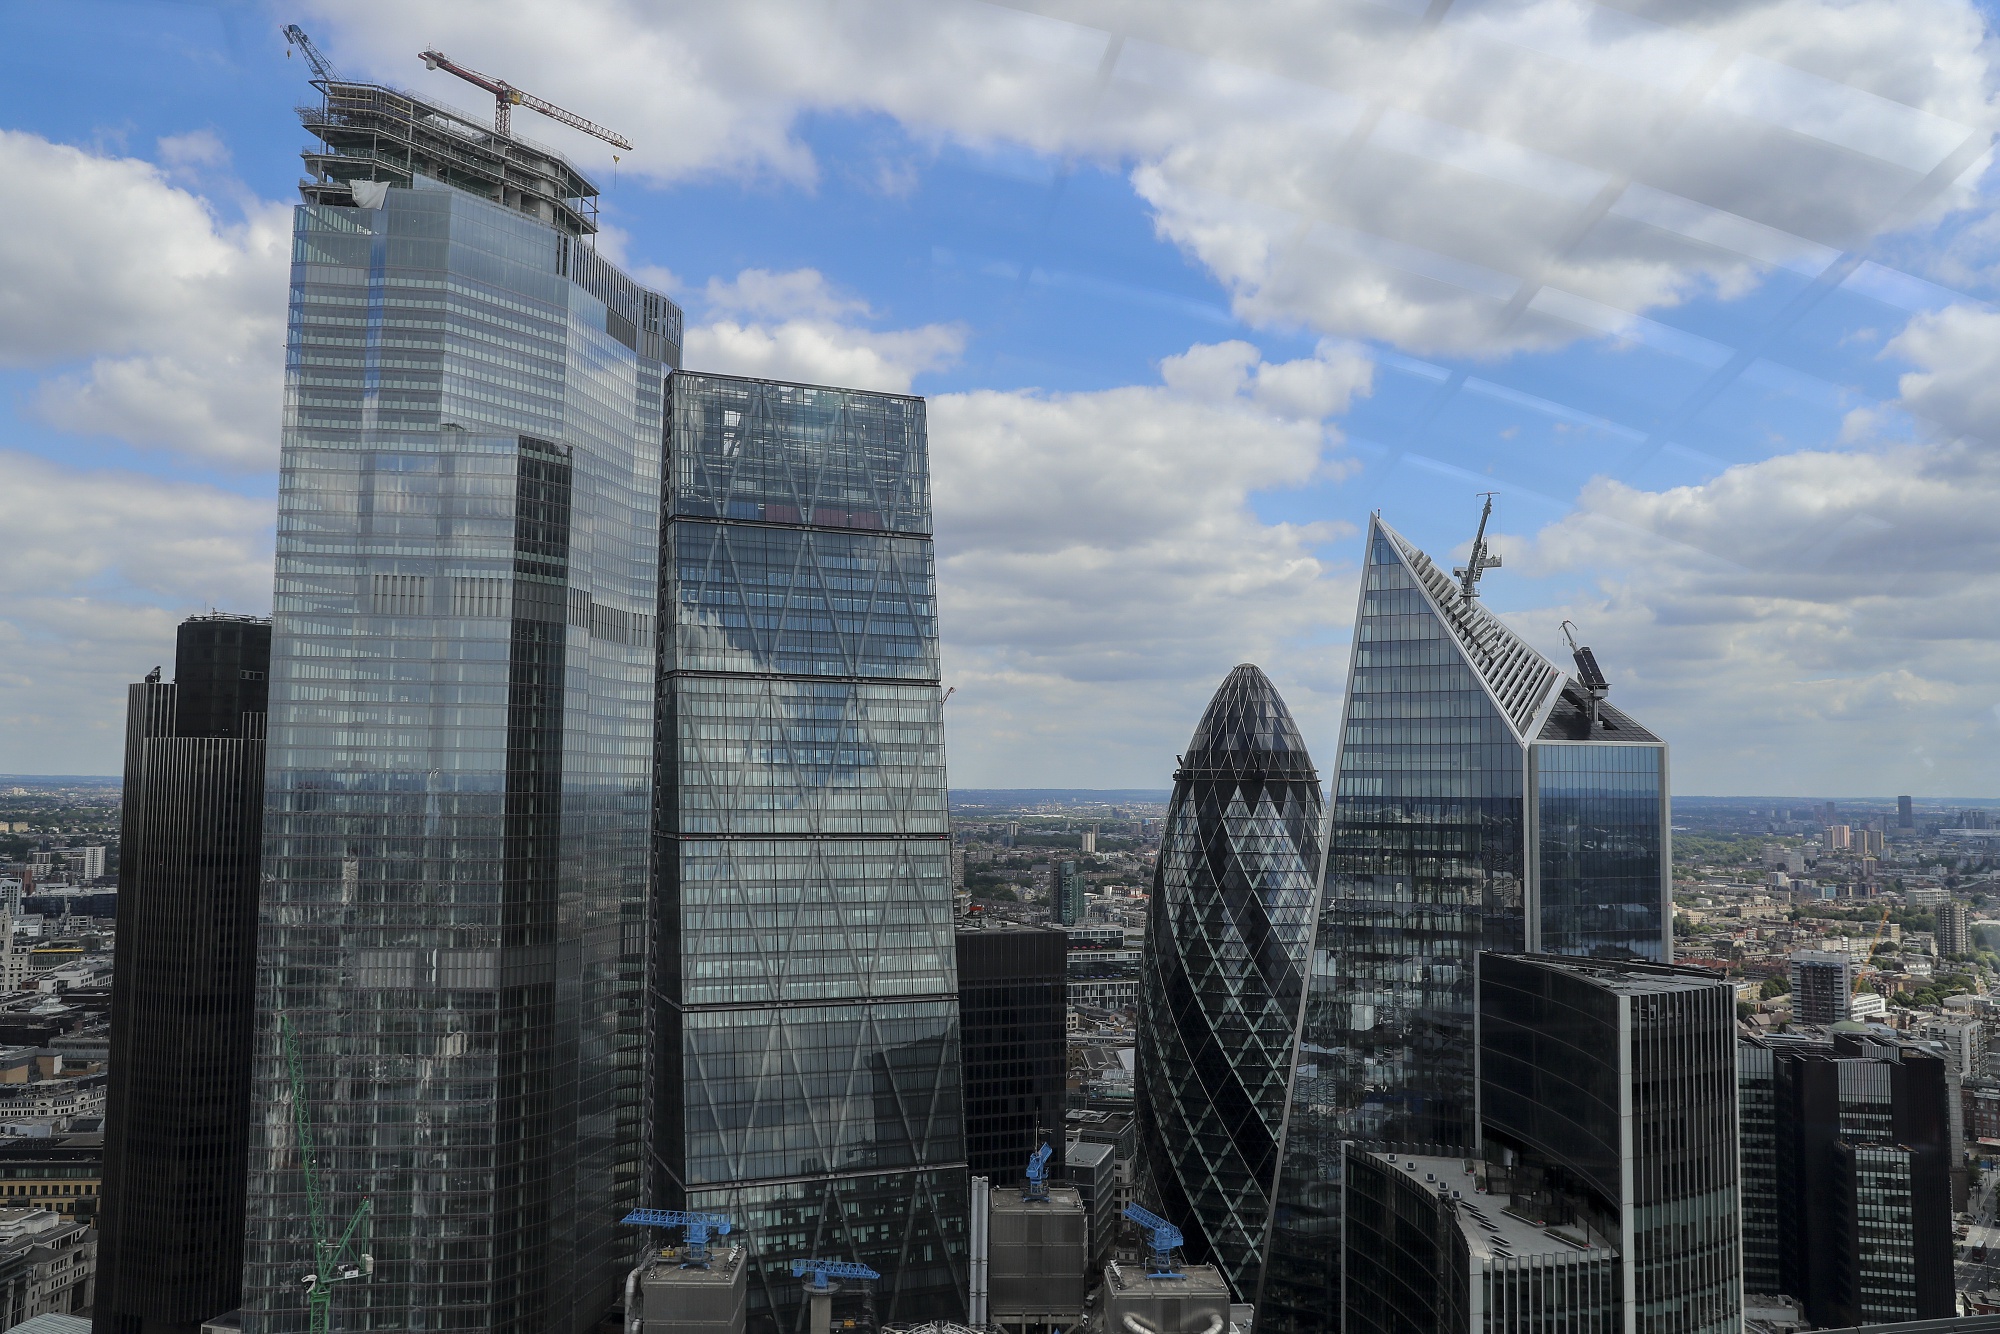 Skyscrapers stand in the City of London's square mile financial district